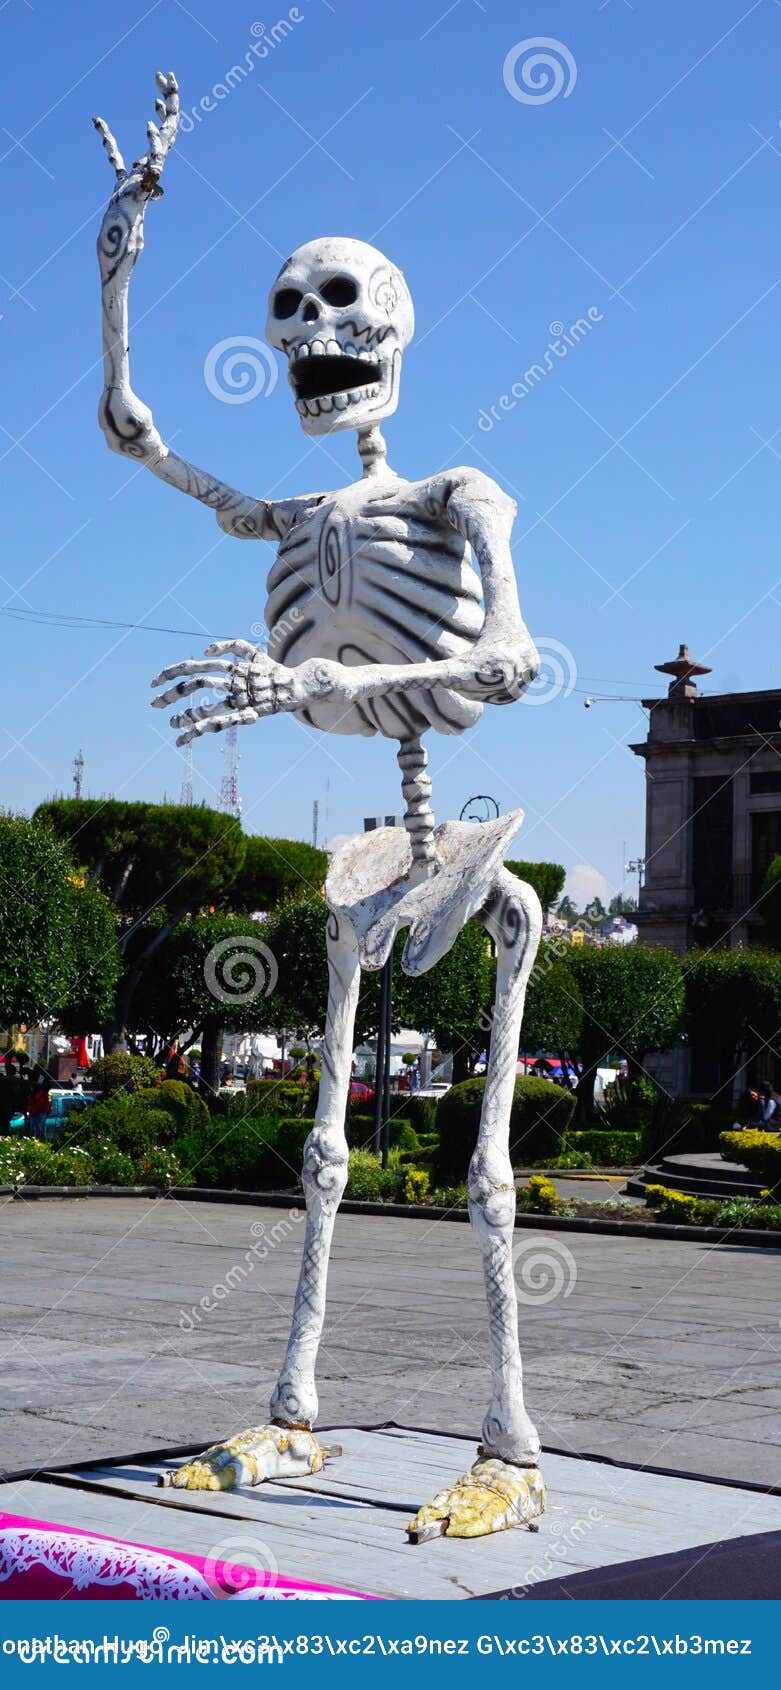 Big tall skeleton made of paper and glue, representation of a man as a skeleton, decorative item used in the mexican day of the dead celebration